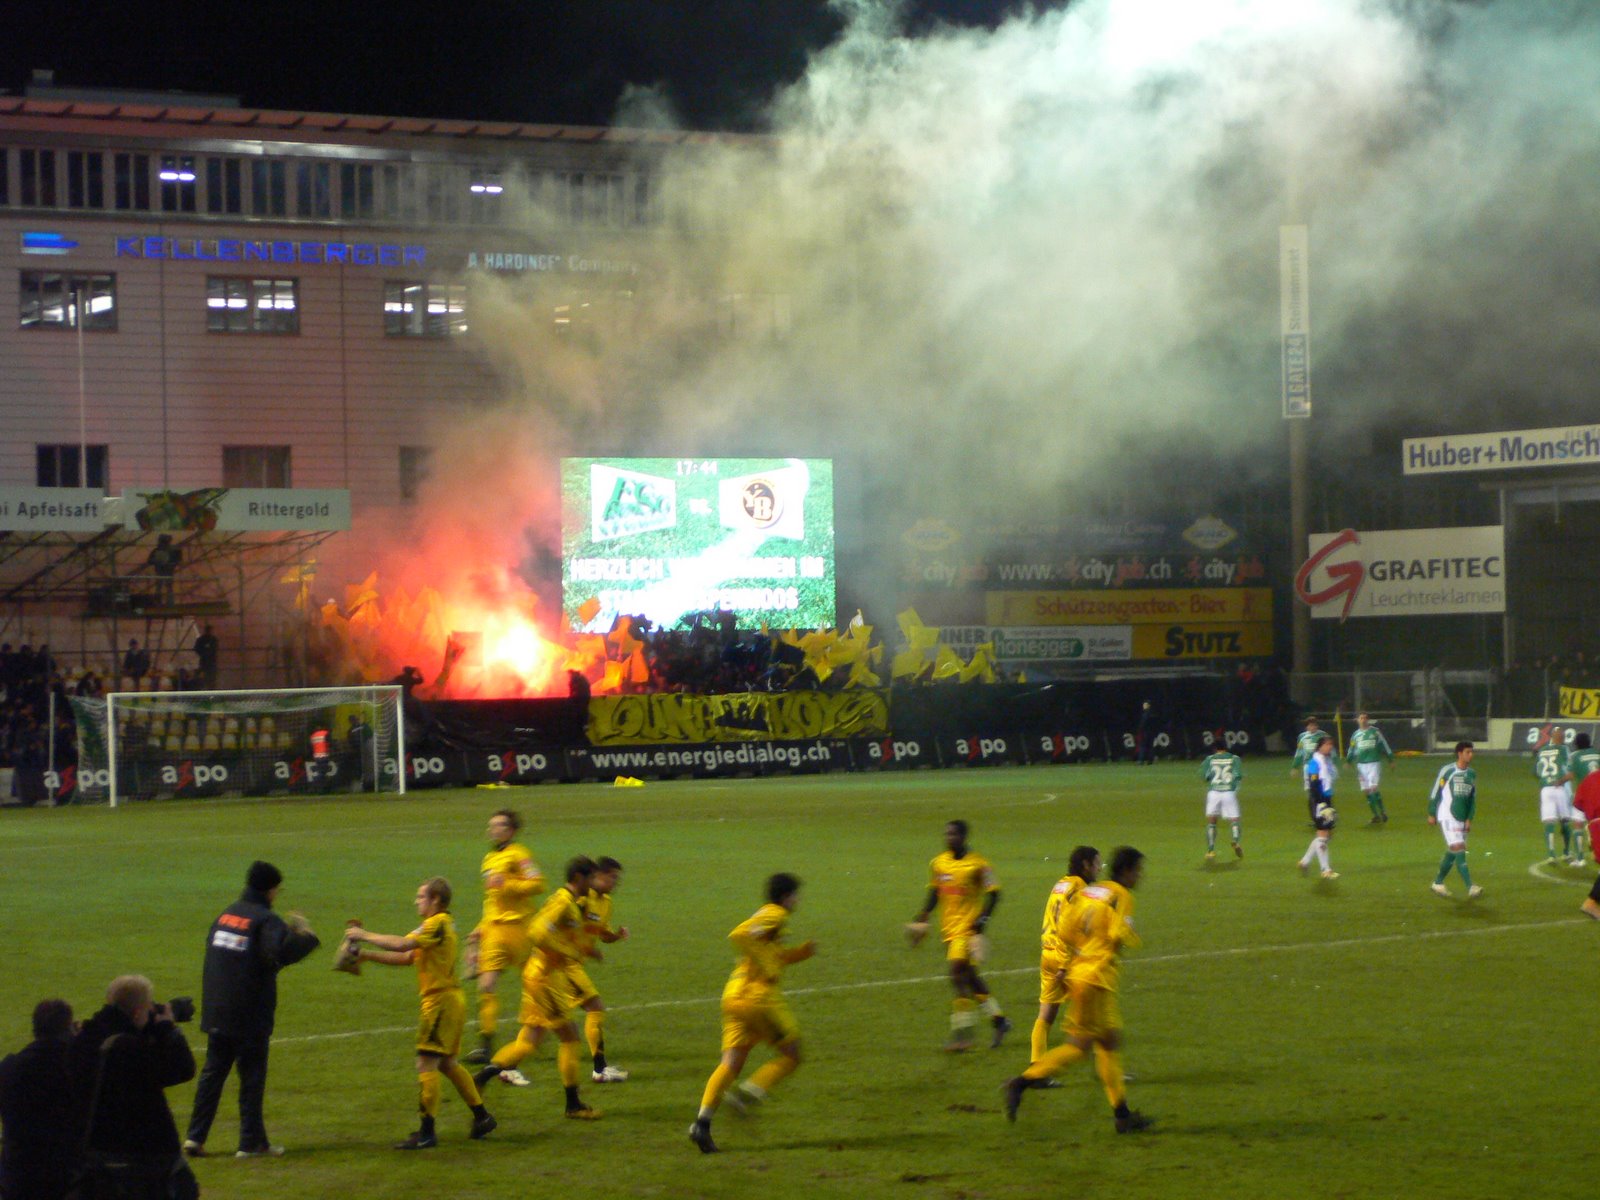 [young+boys+flares+at+st+gallen.jpg]